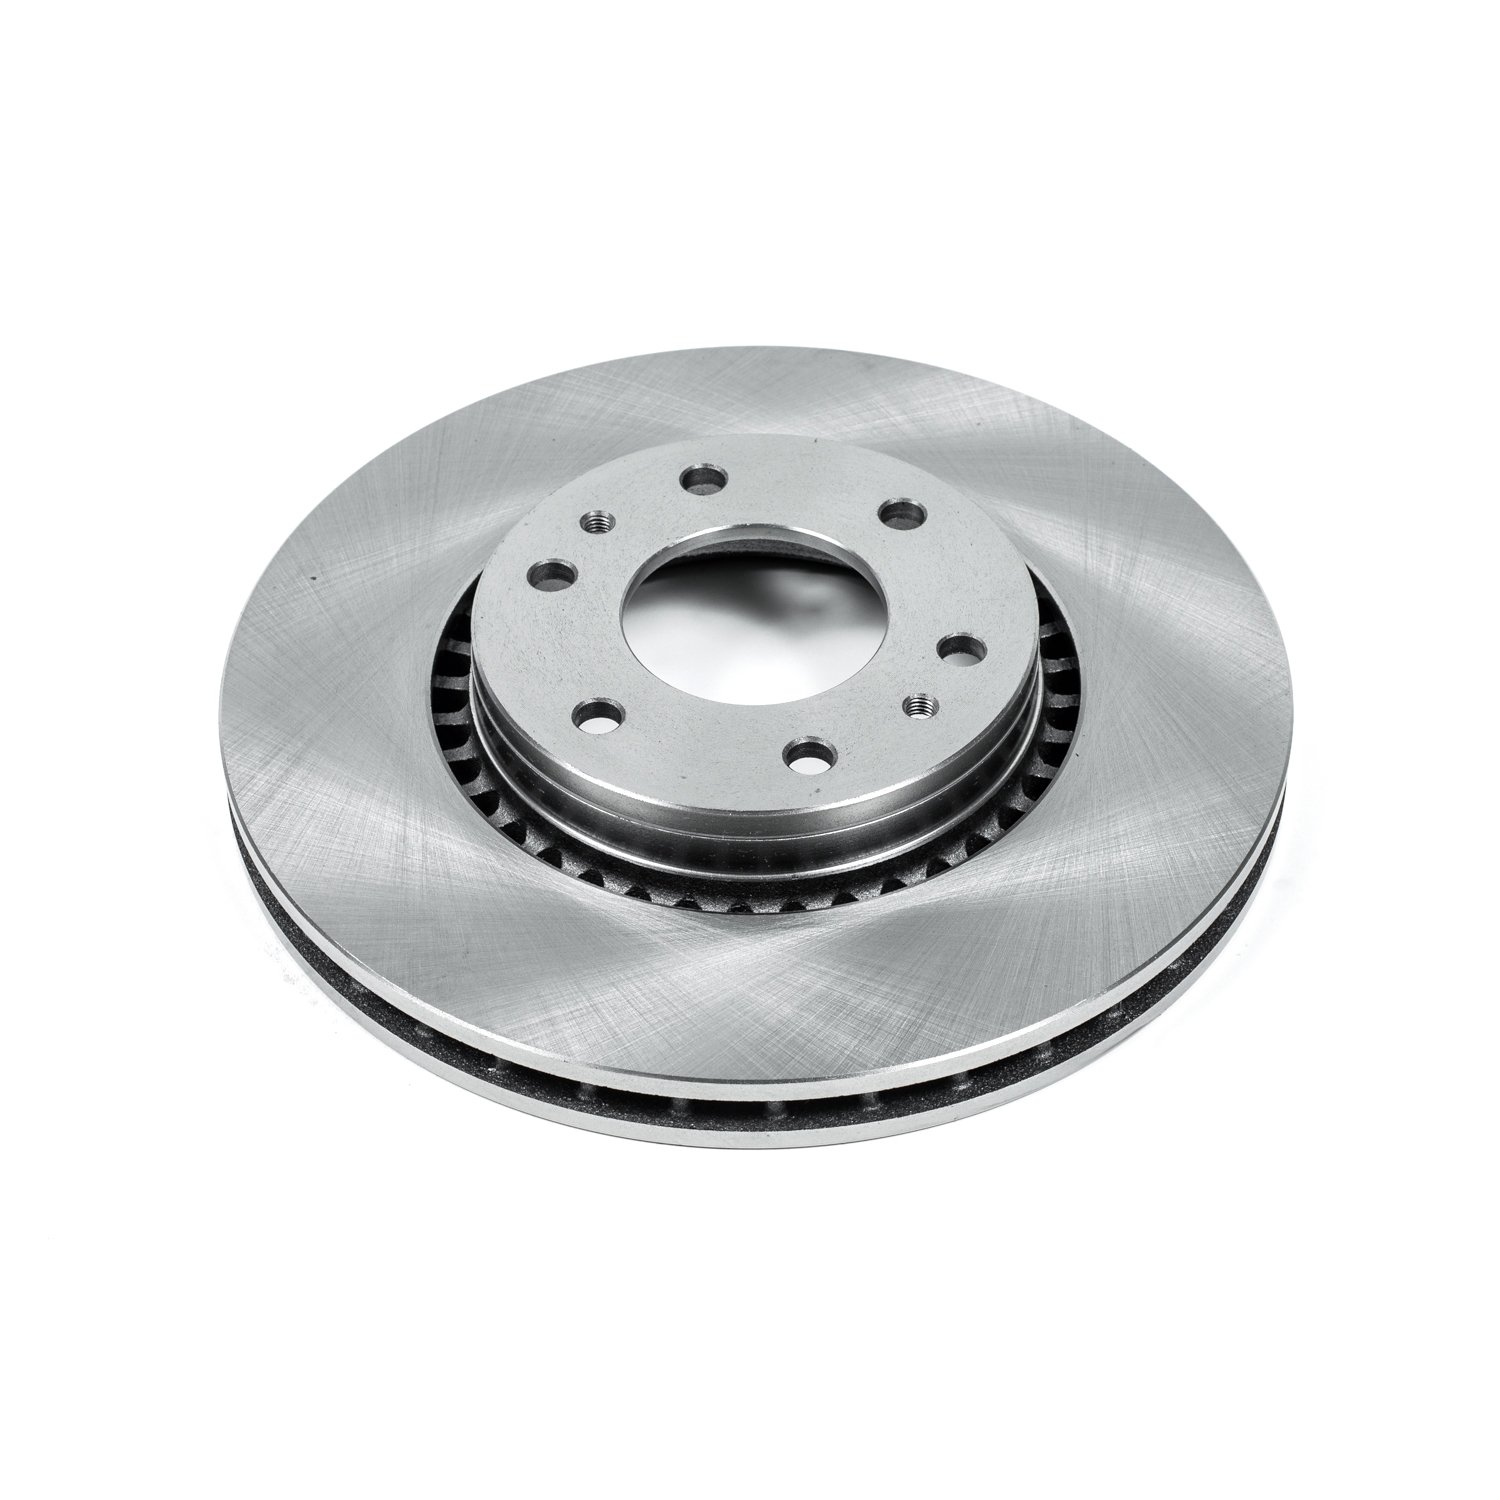 Autospecialty OE Replacement Front Brake Rotor Fits Select 2002-2009 Buick, Chevrolet, GMC, Oldsmobile, Saab Models